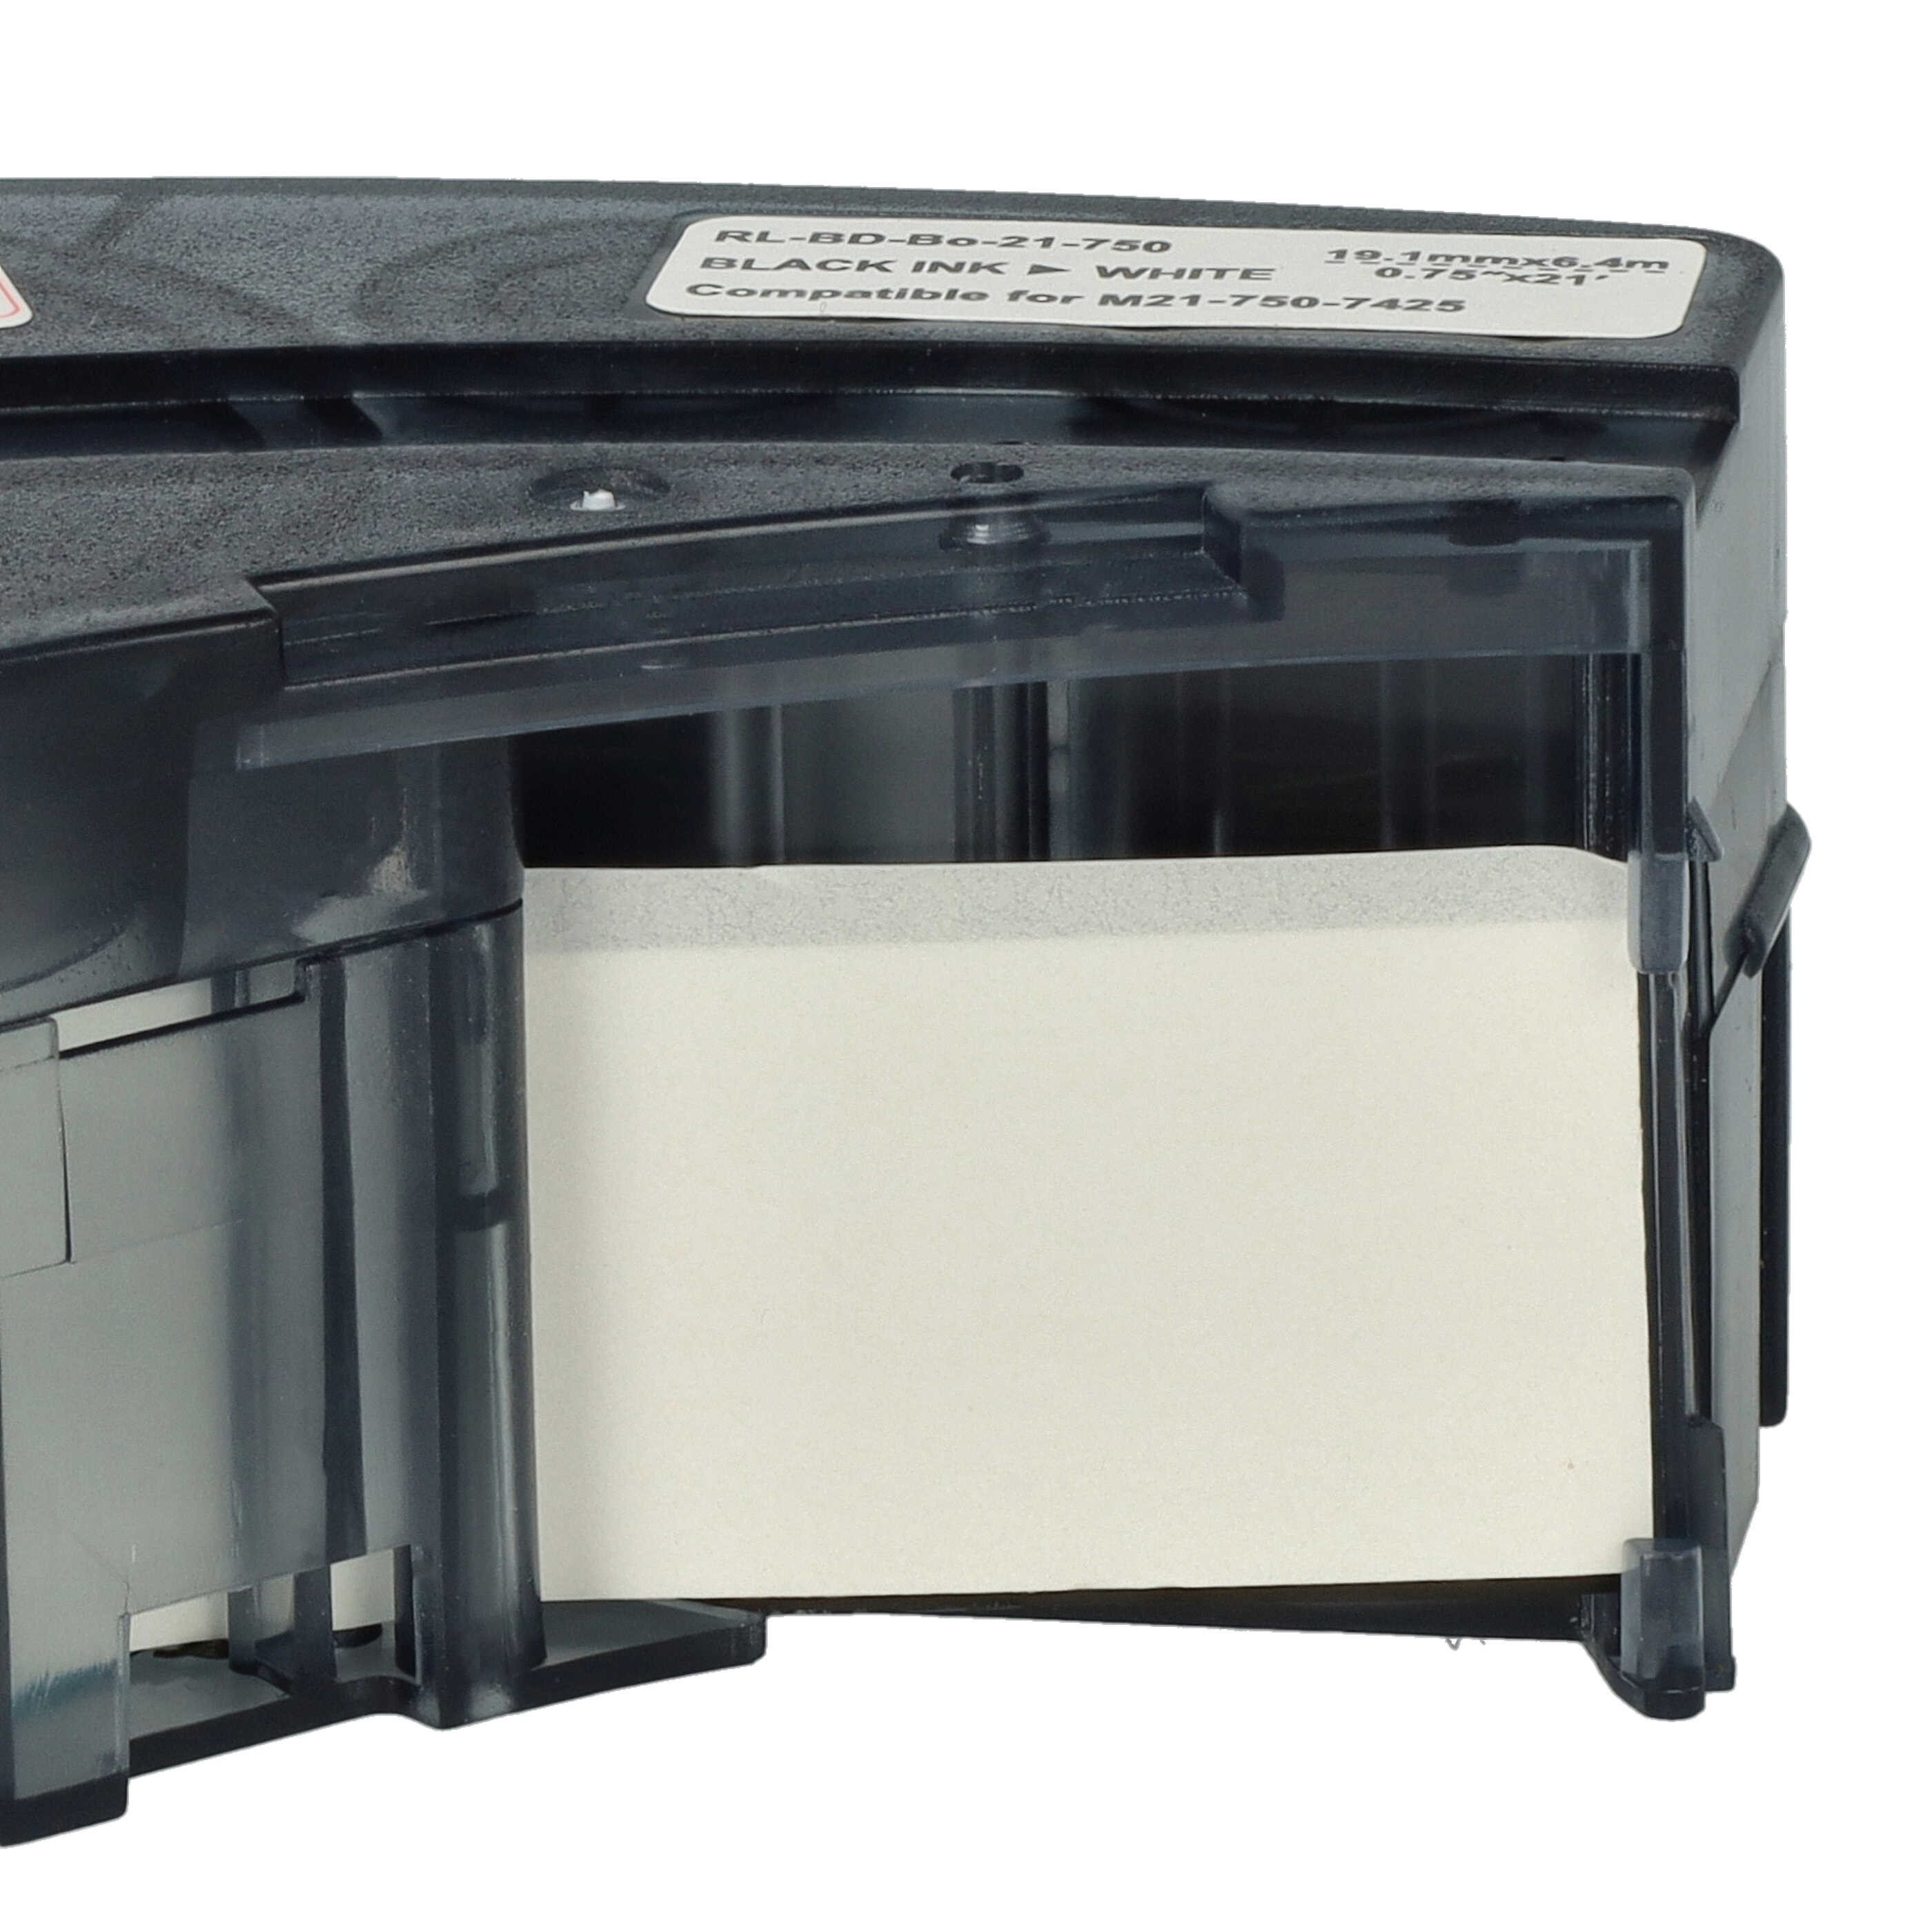 3x Label Tape as Replacement for Brady M21-750-7425 - 19.05 mm Black to White, polypropylene